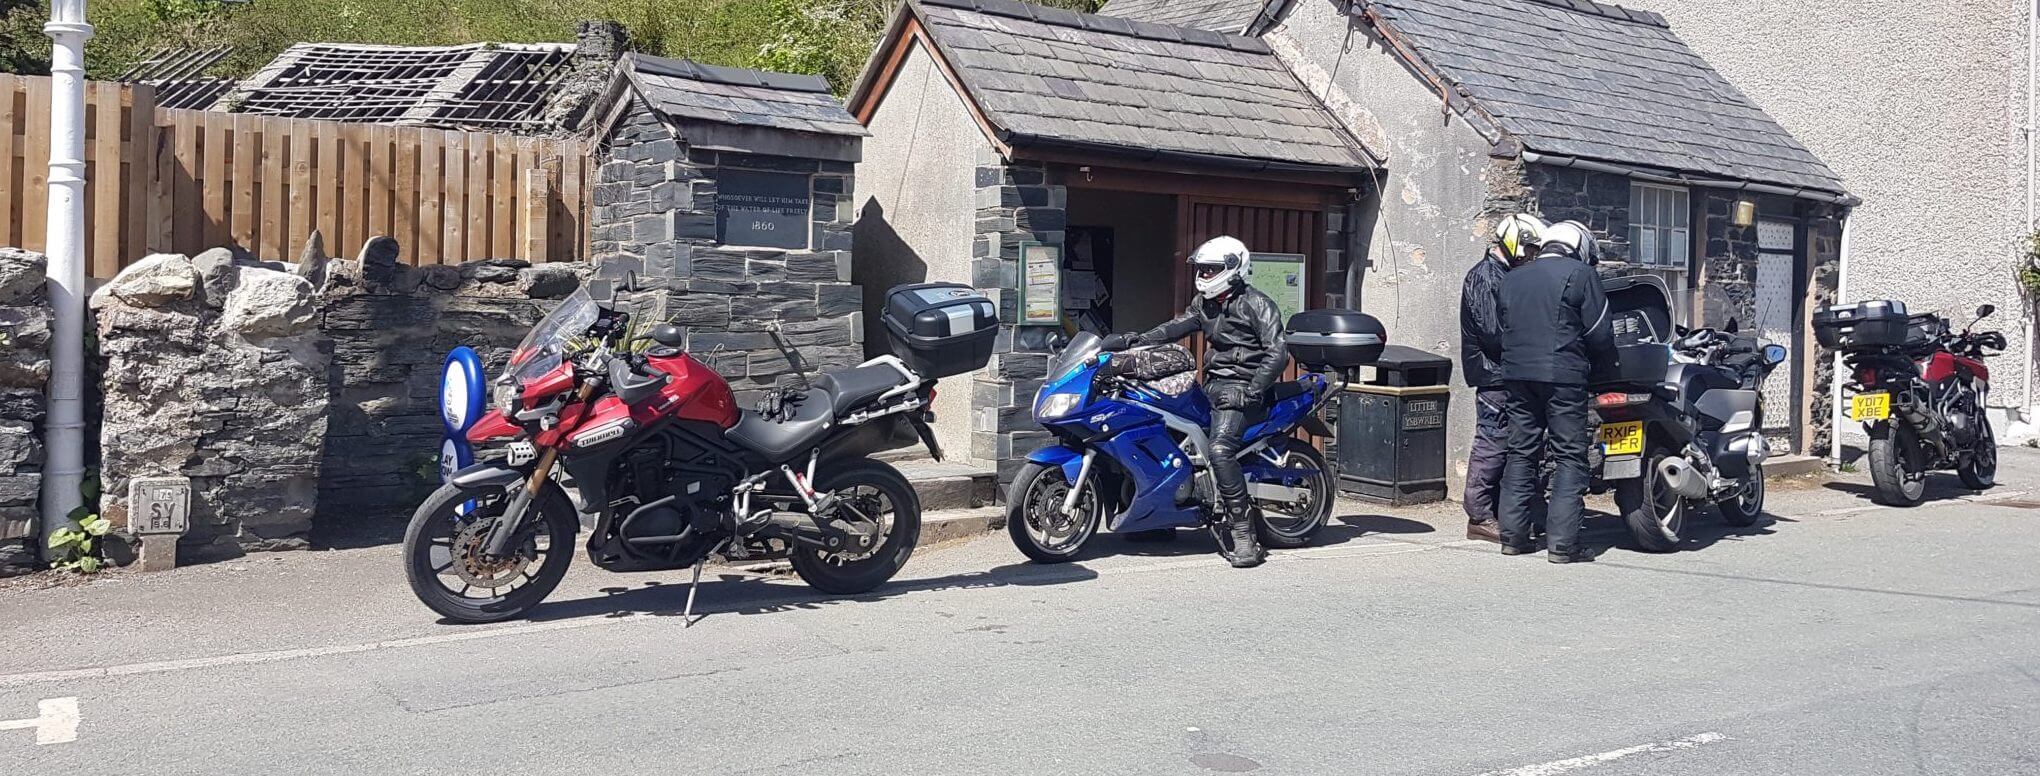 Welsh National Rally 2019 – Ride Report